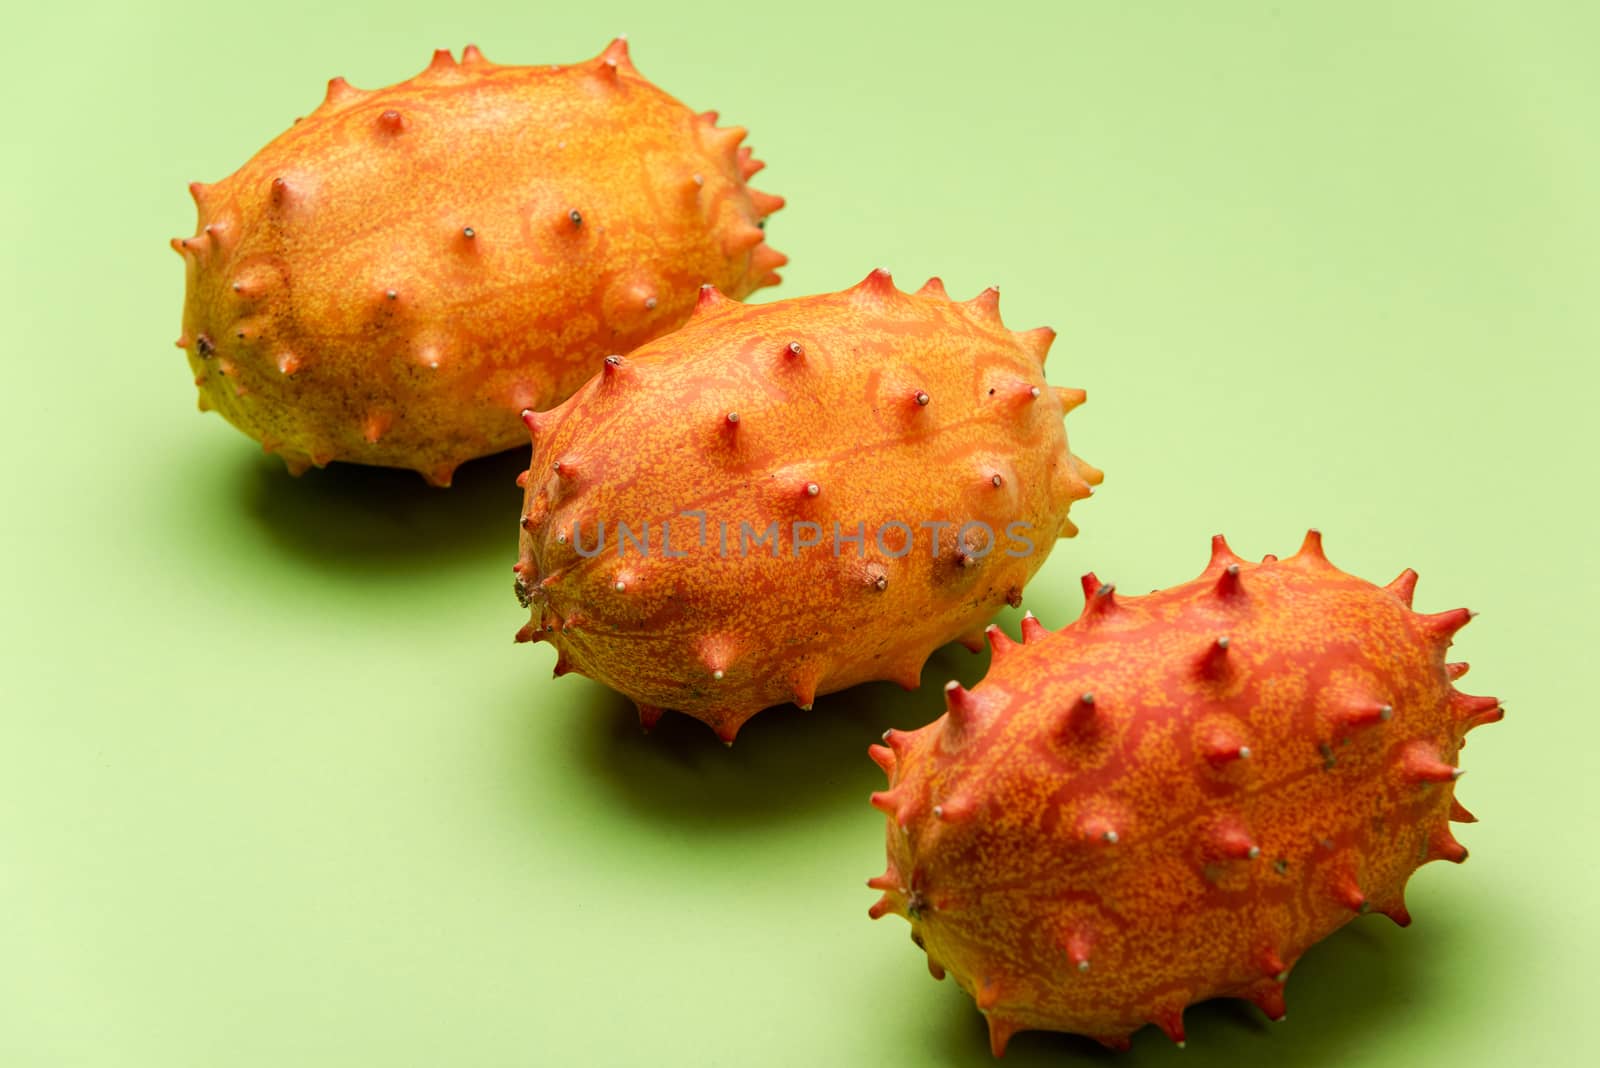 Kiwano or Horned Melon on Green Pastel Background. Exotic Fruits by merc67